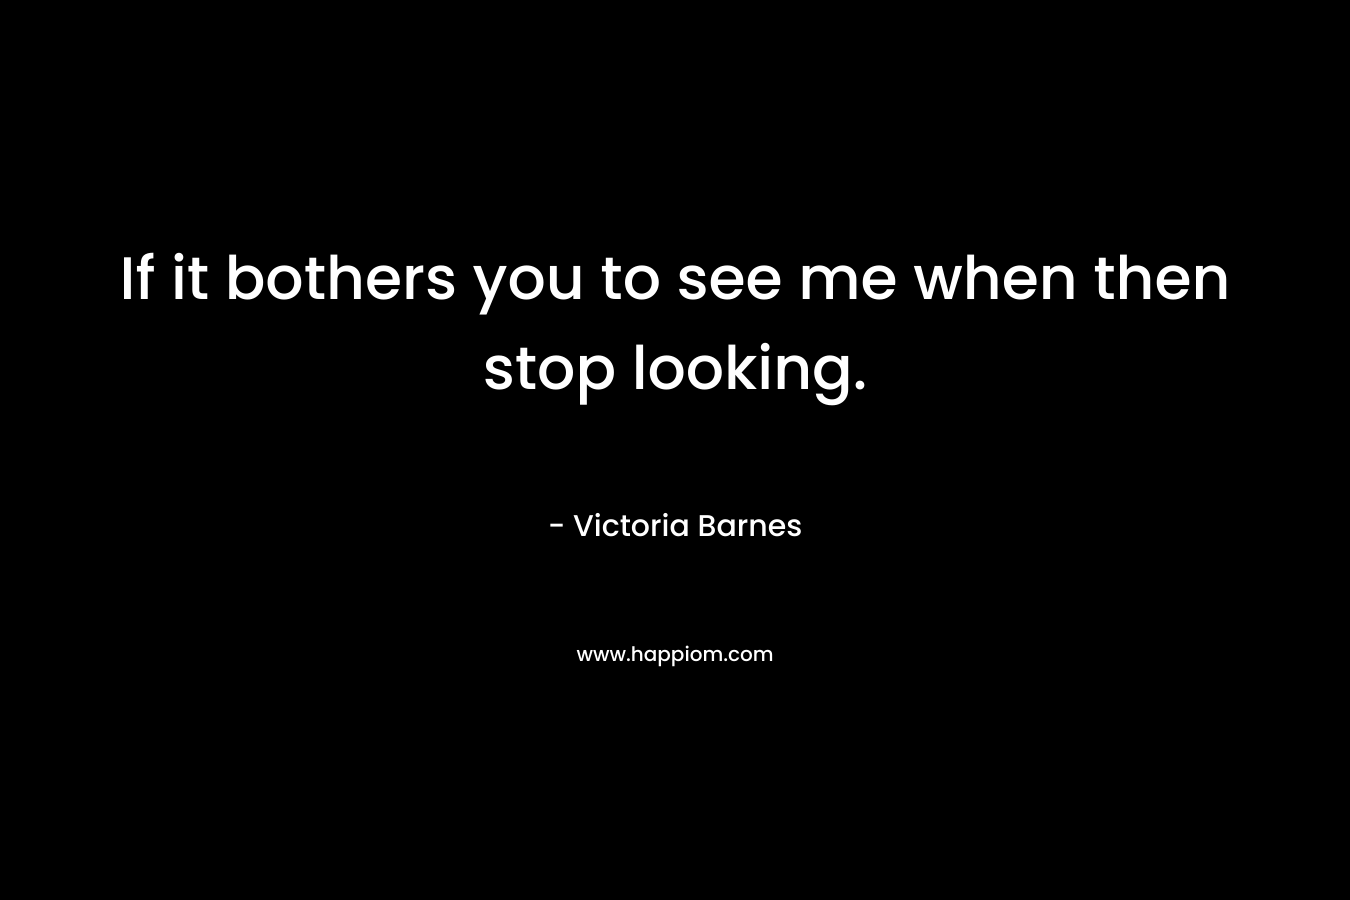 If it bothers you to see me when then stop looking.